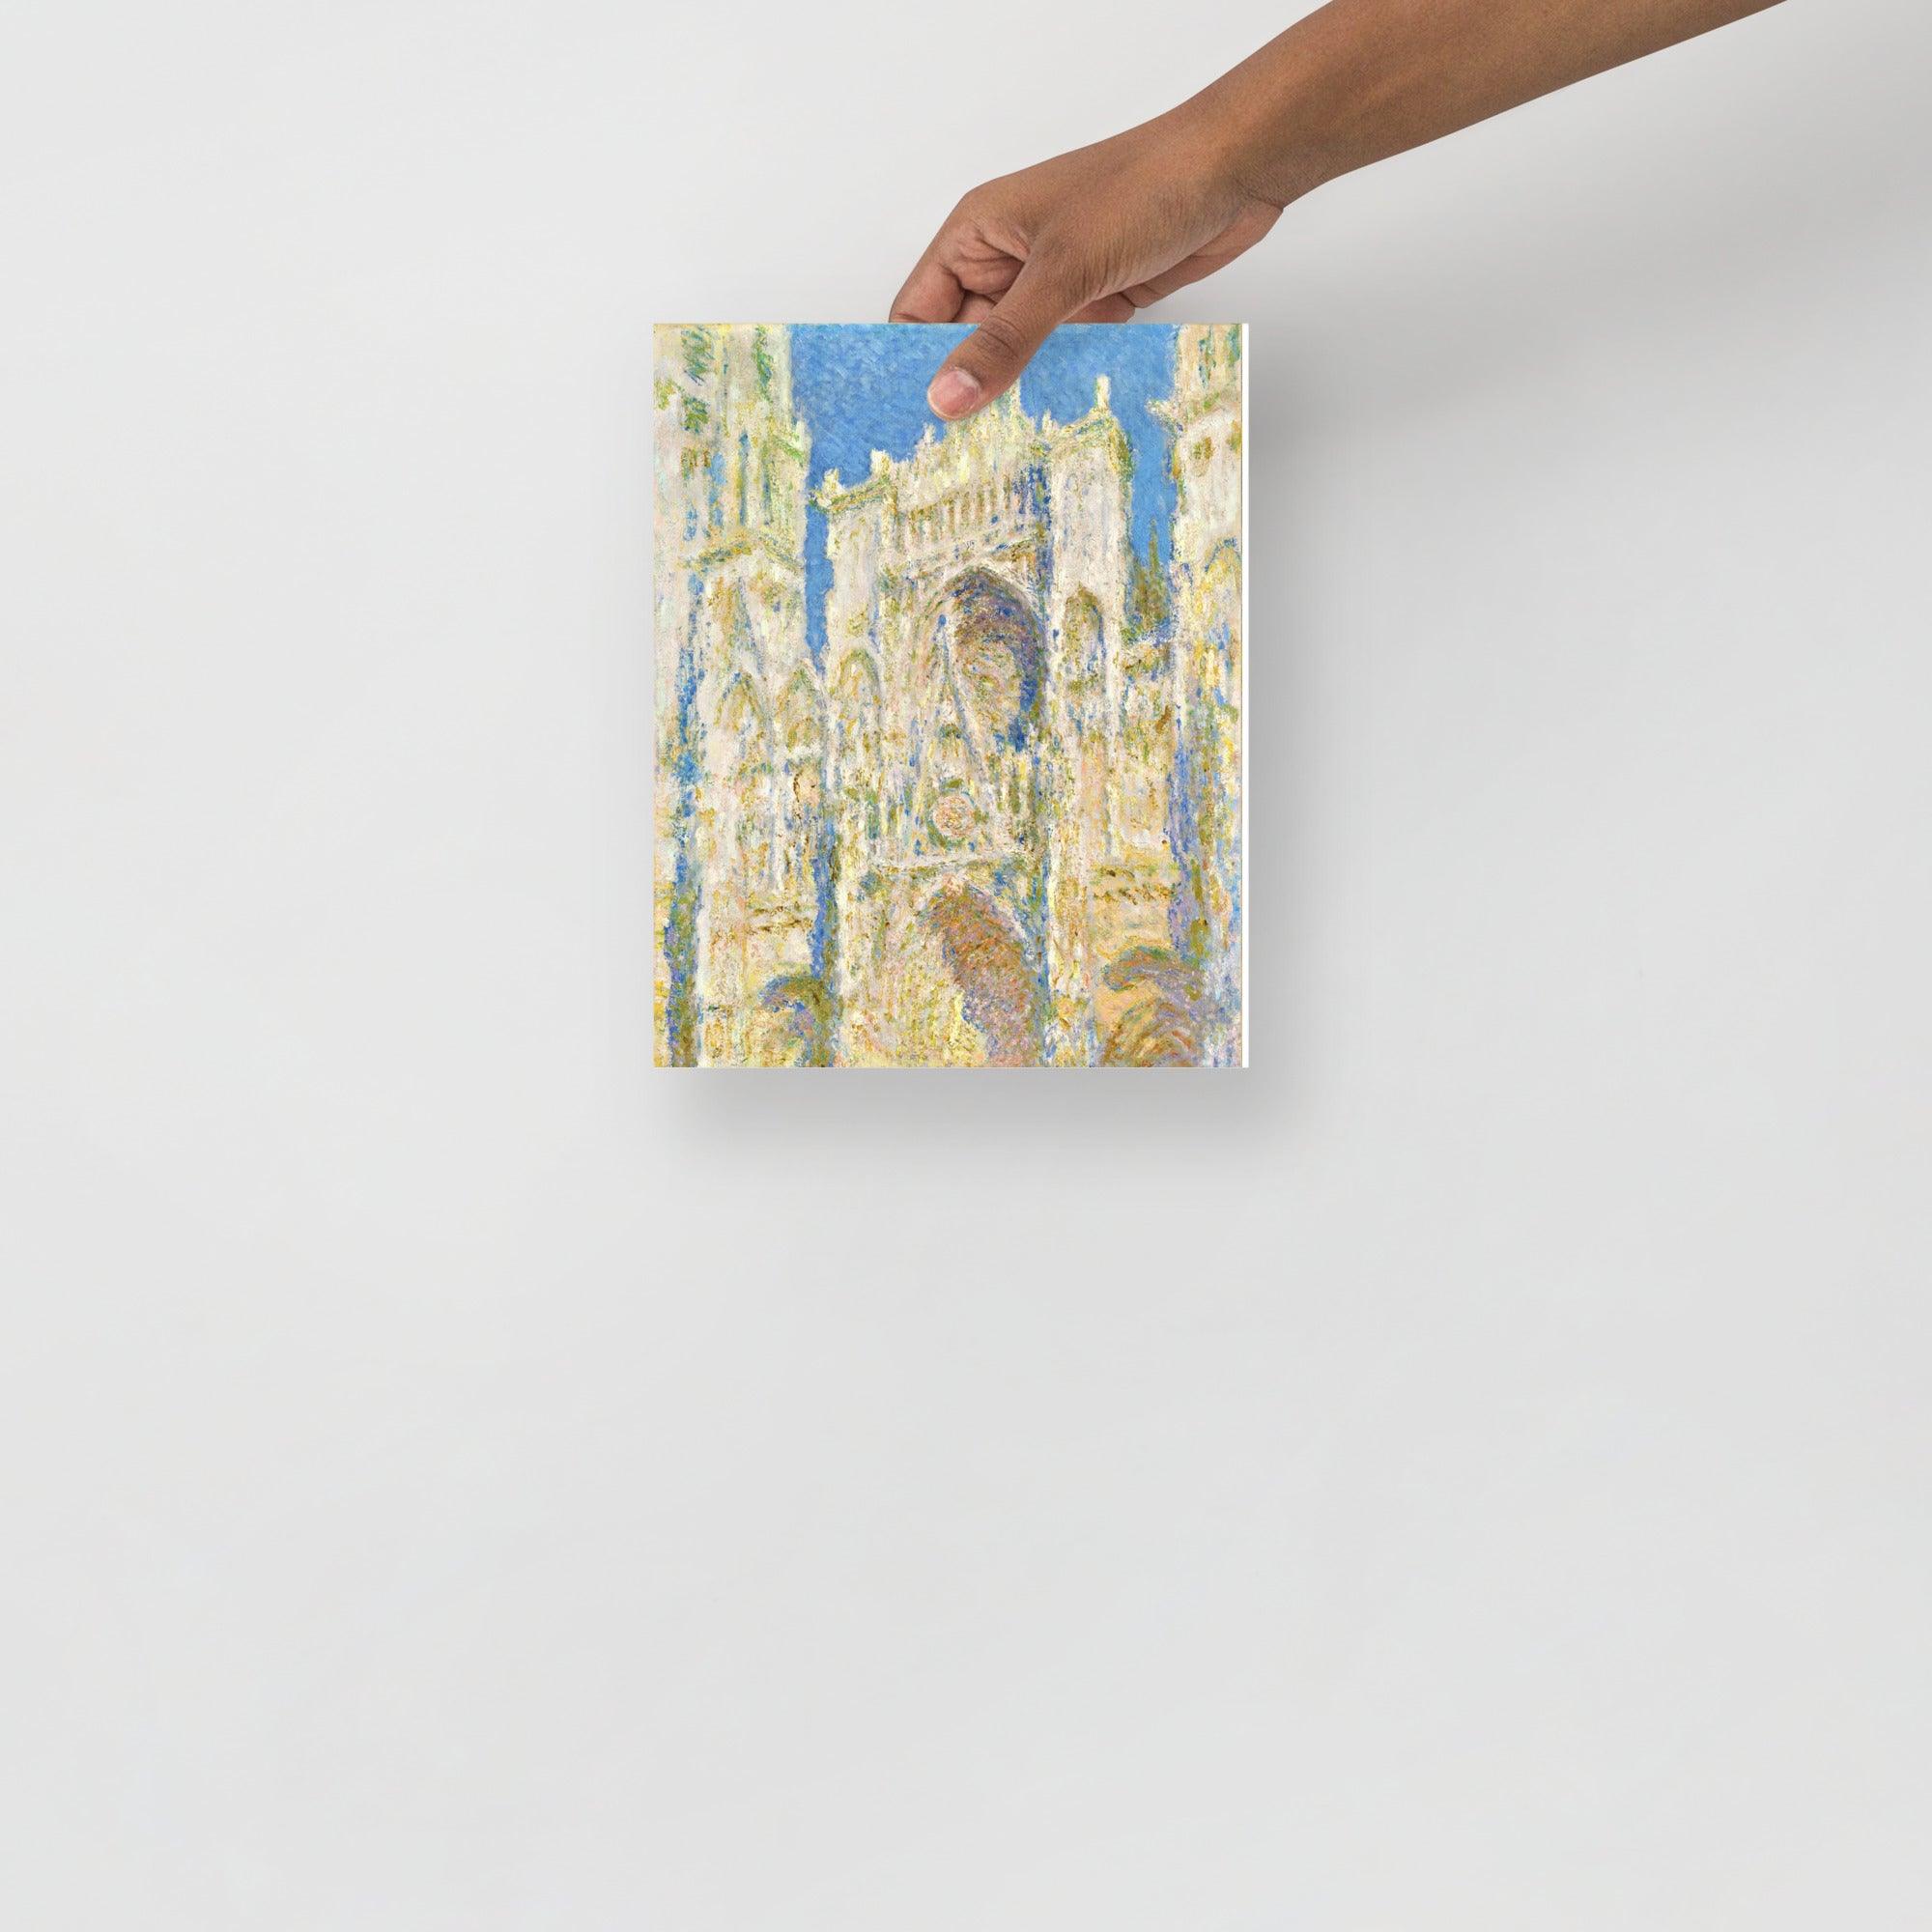 A Rouen Cathedral, West Facade by Claude Monet poster on a plain backdrop in size 8x10”.